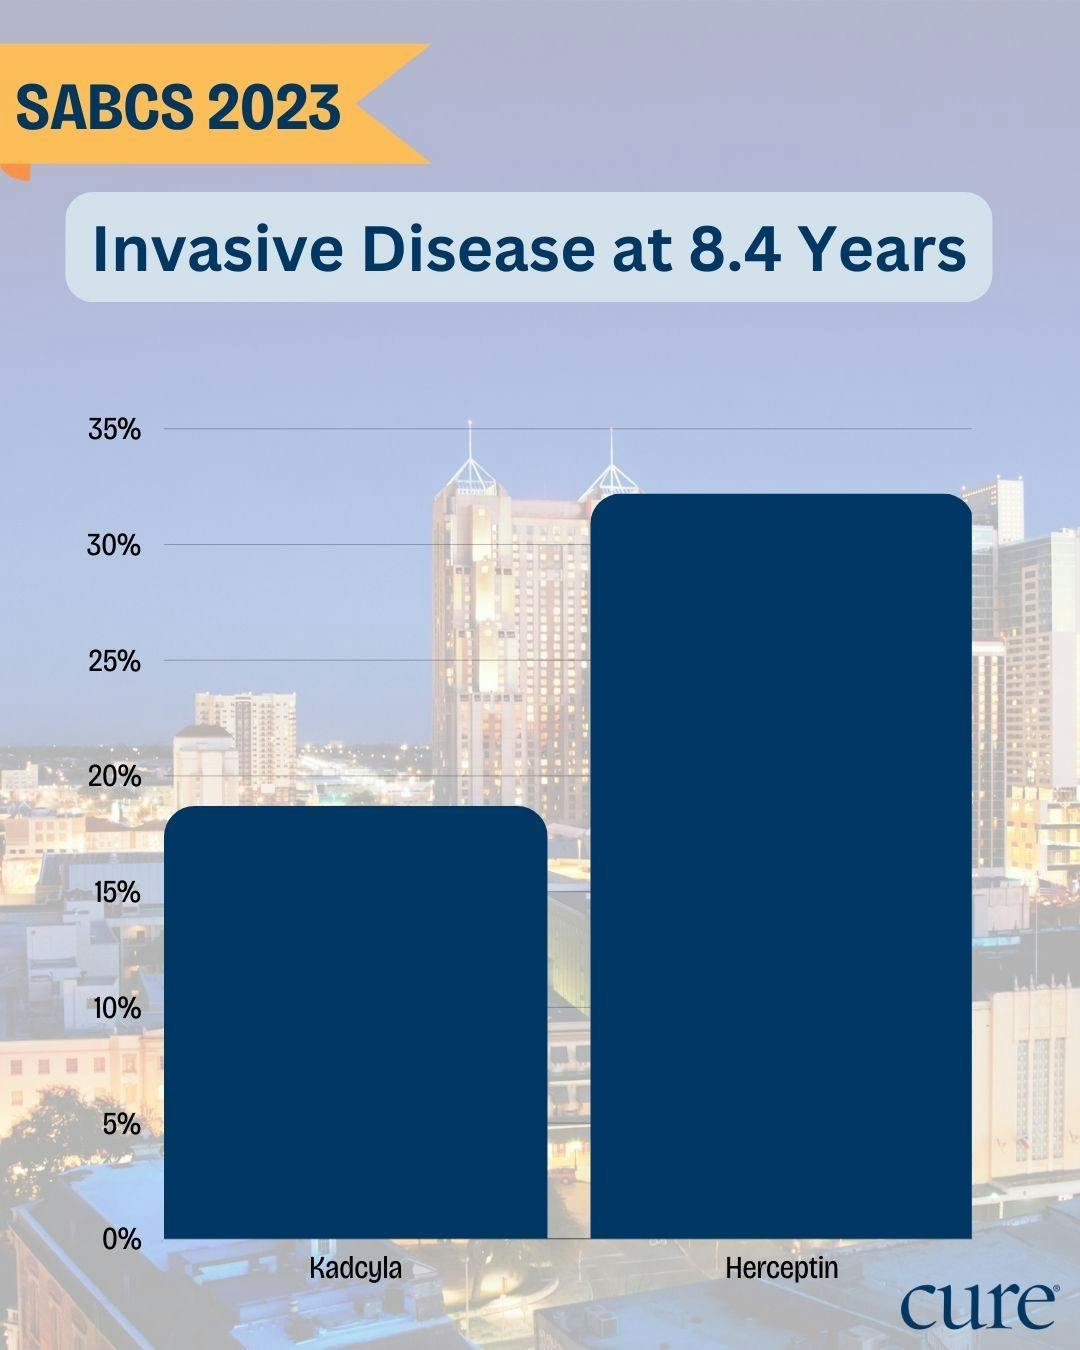 Graph showing: At 8.4 years, fewer patients on Kadcyla experienced invasive disease than those on Herceptin.